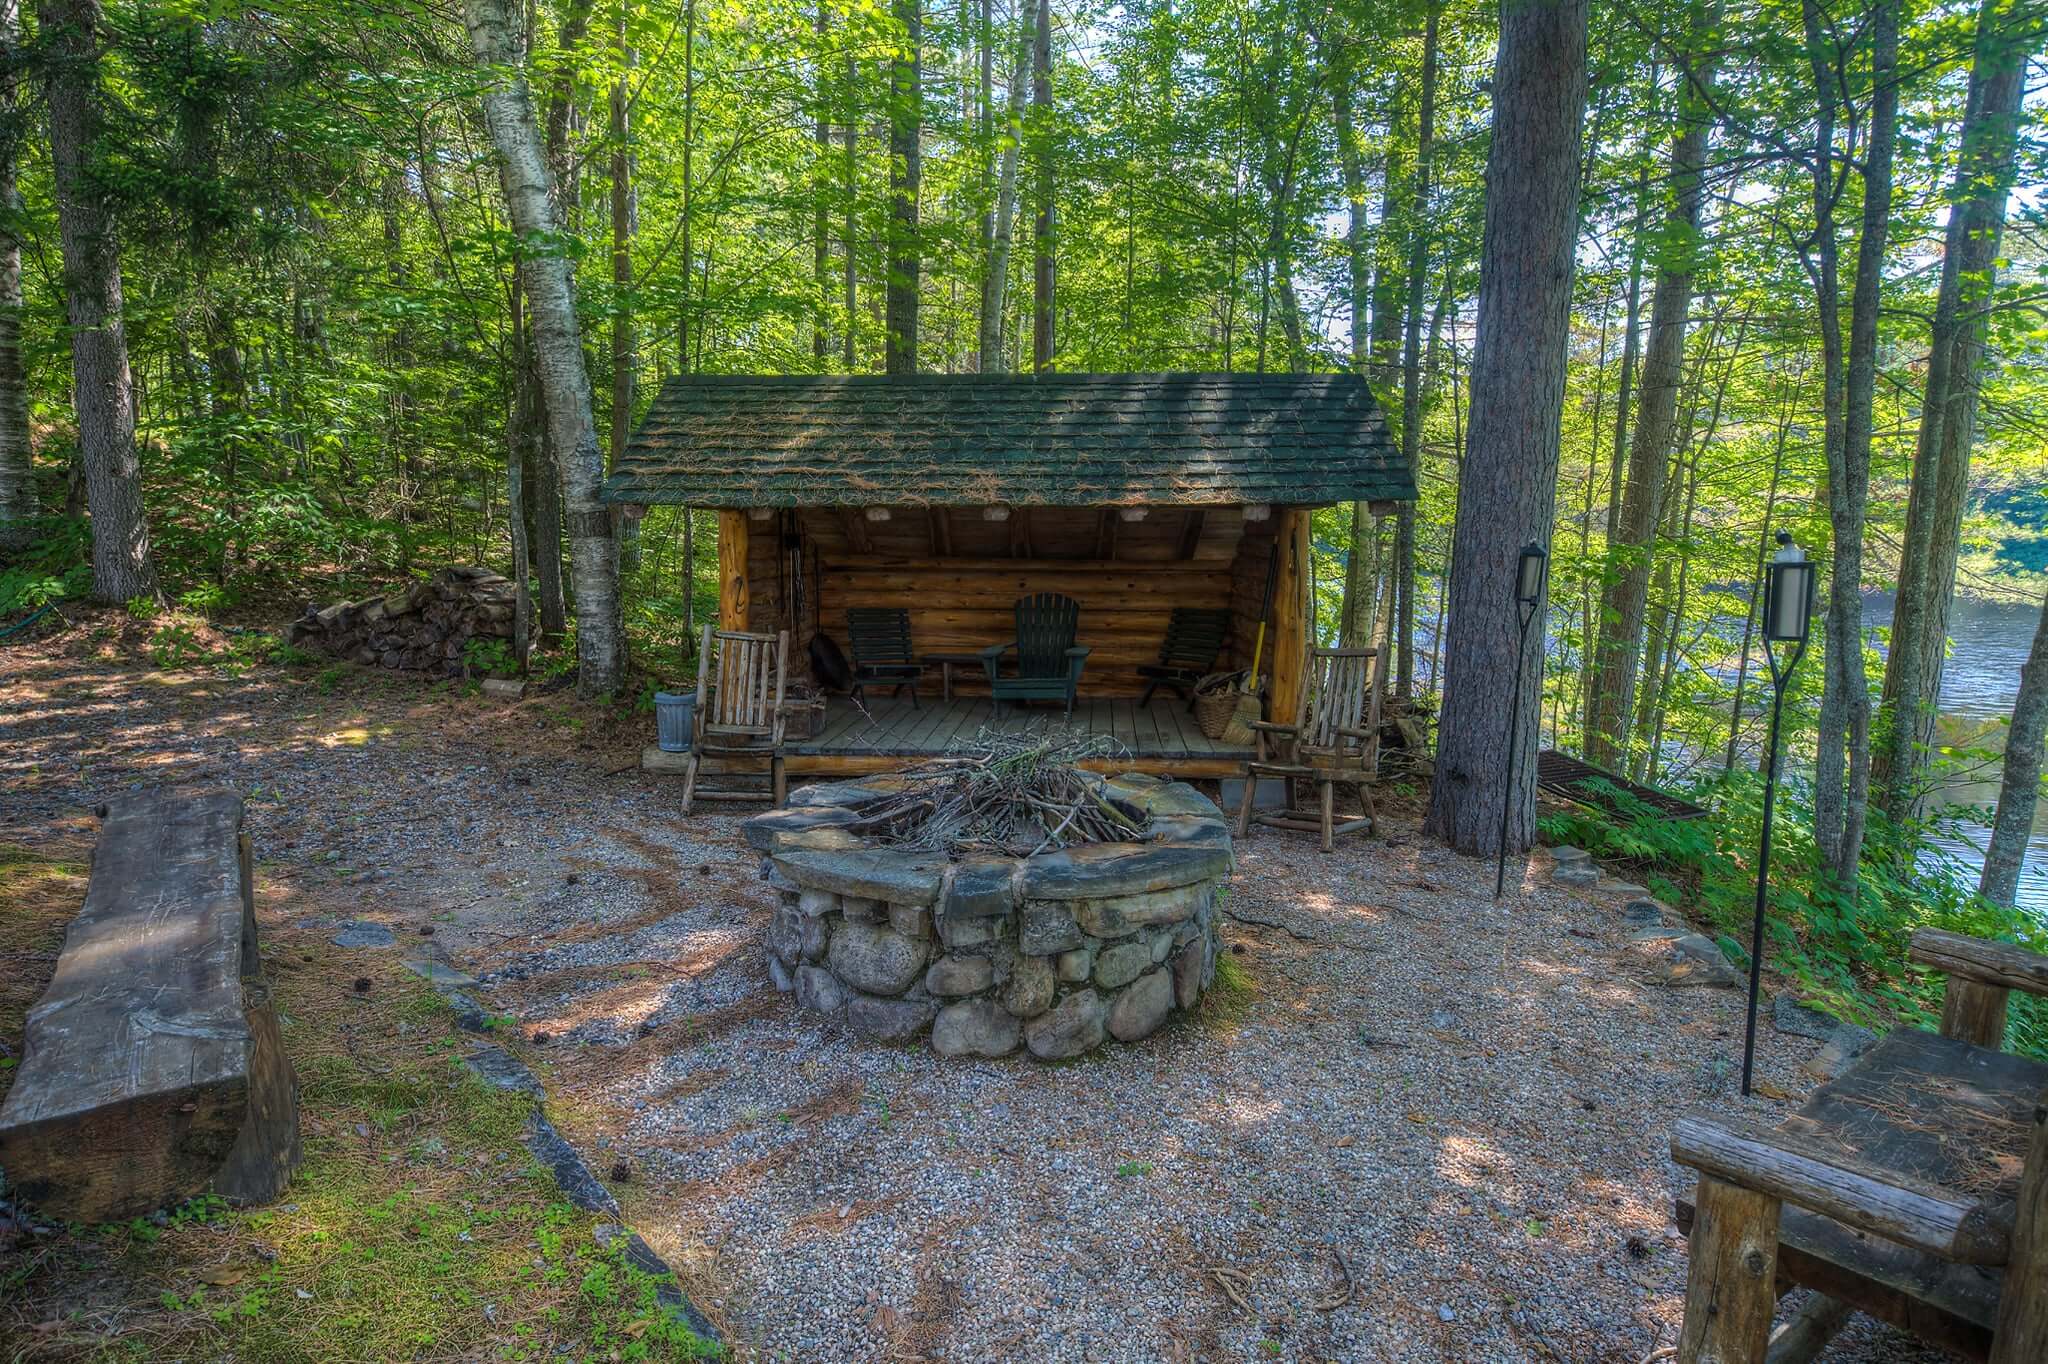 A log cabin-style lean-to sits behind a stone fire pit waiting for visitors to cozy up next to it